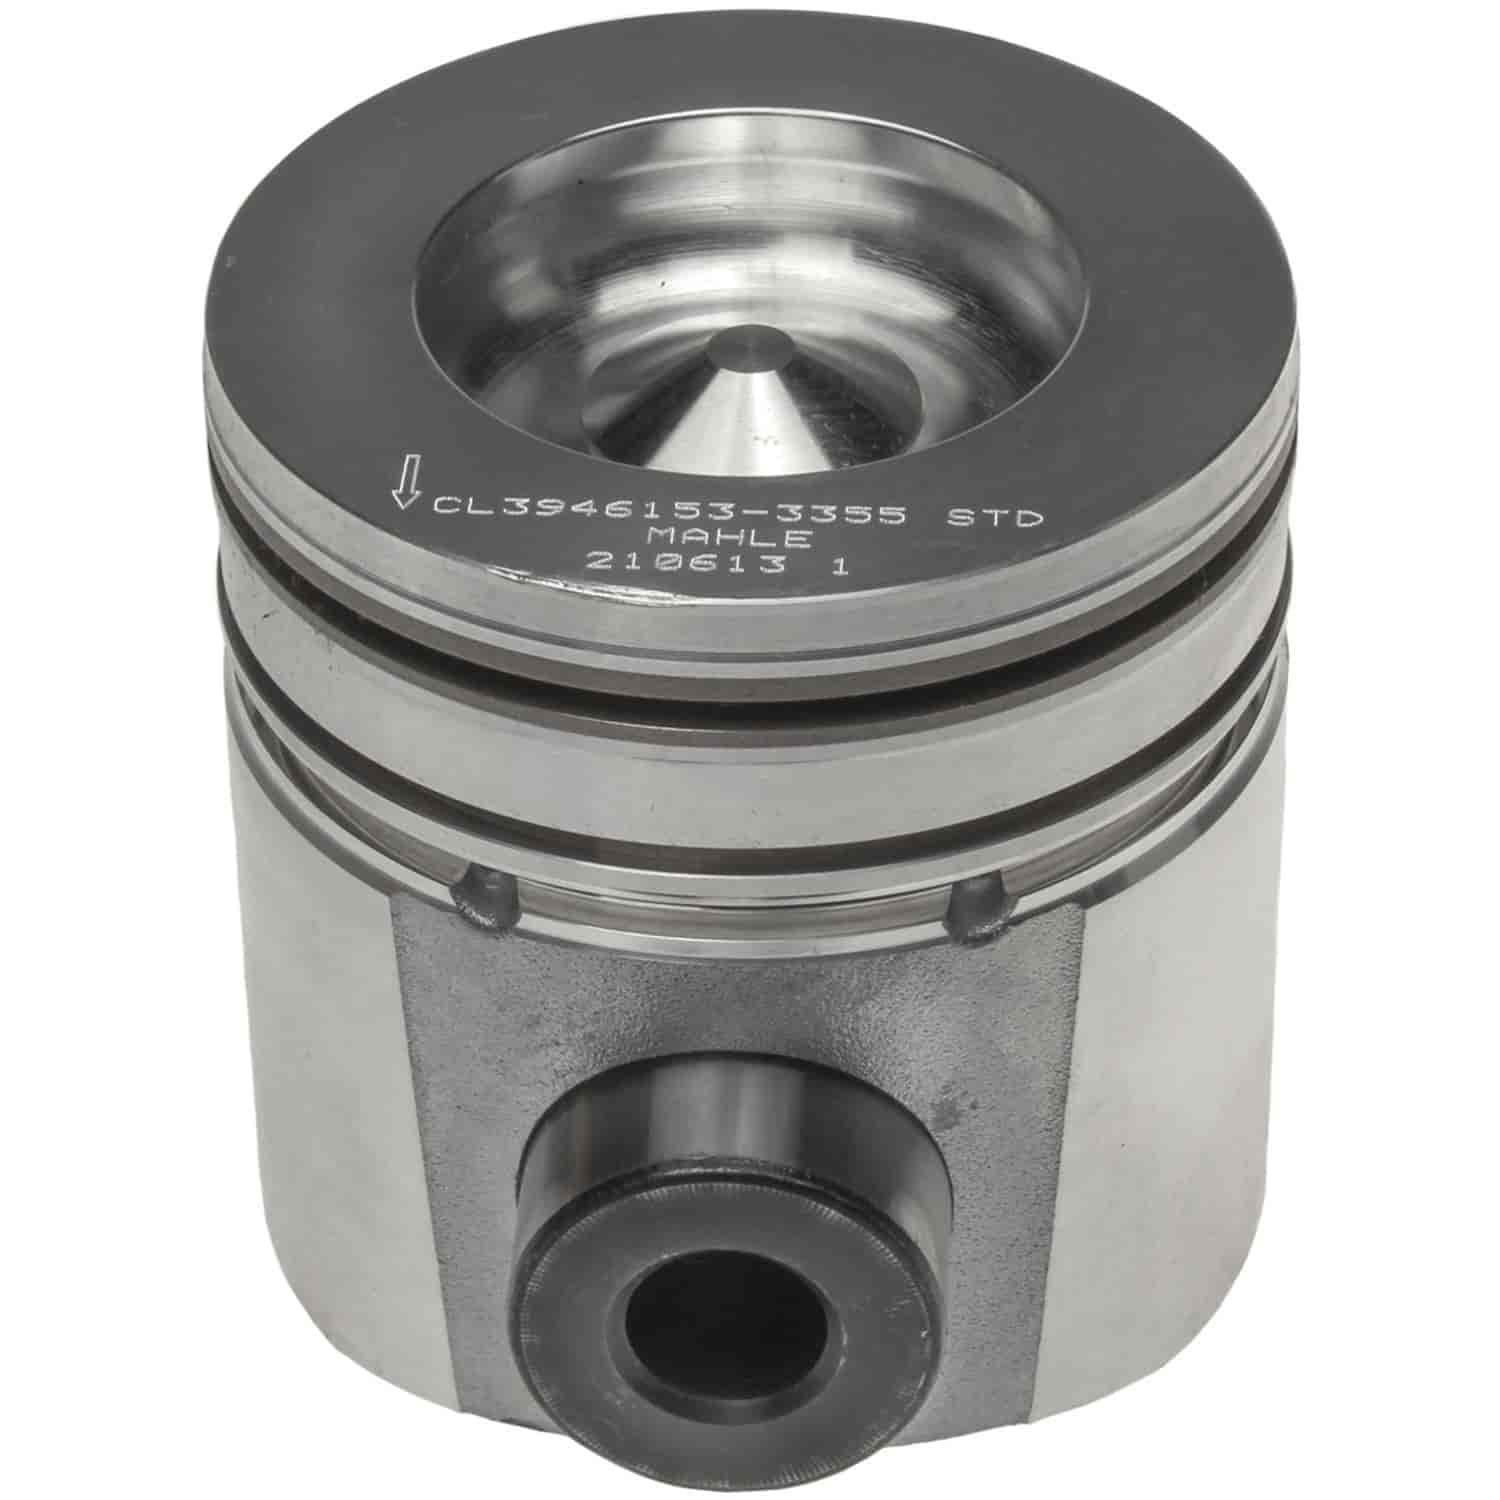 Piston and Rings Set 2001-2002 Dodge, Fits Cummins Diesel L6 5.9L with 4.036" Bore (+.020")